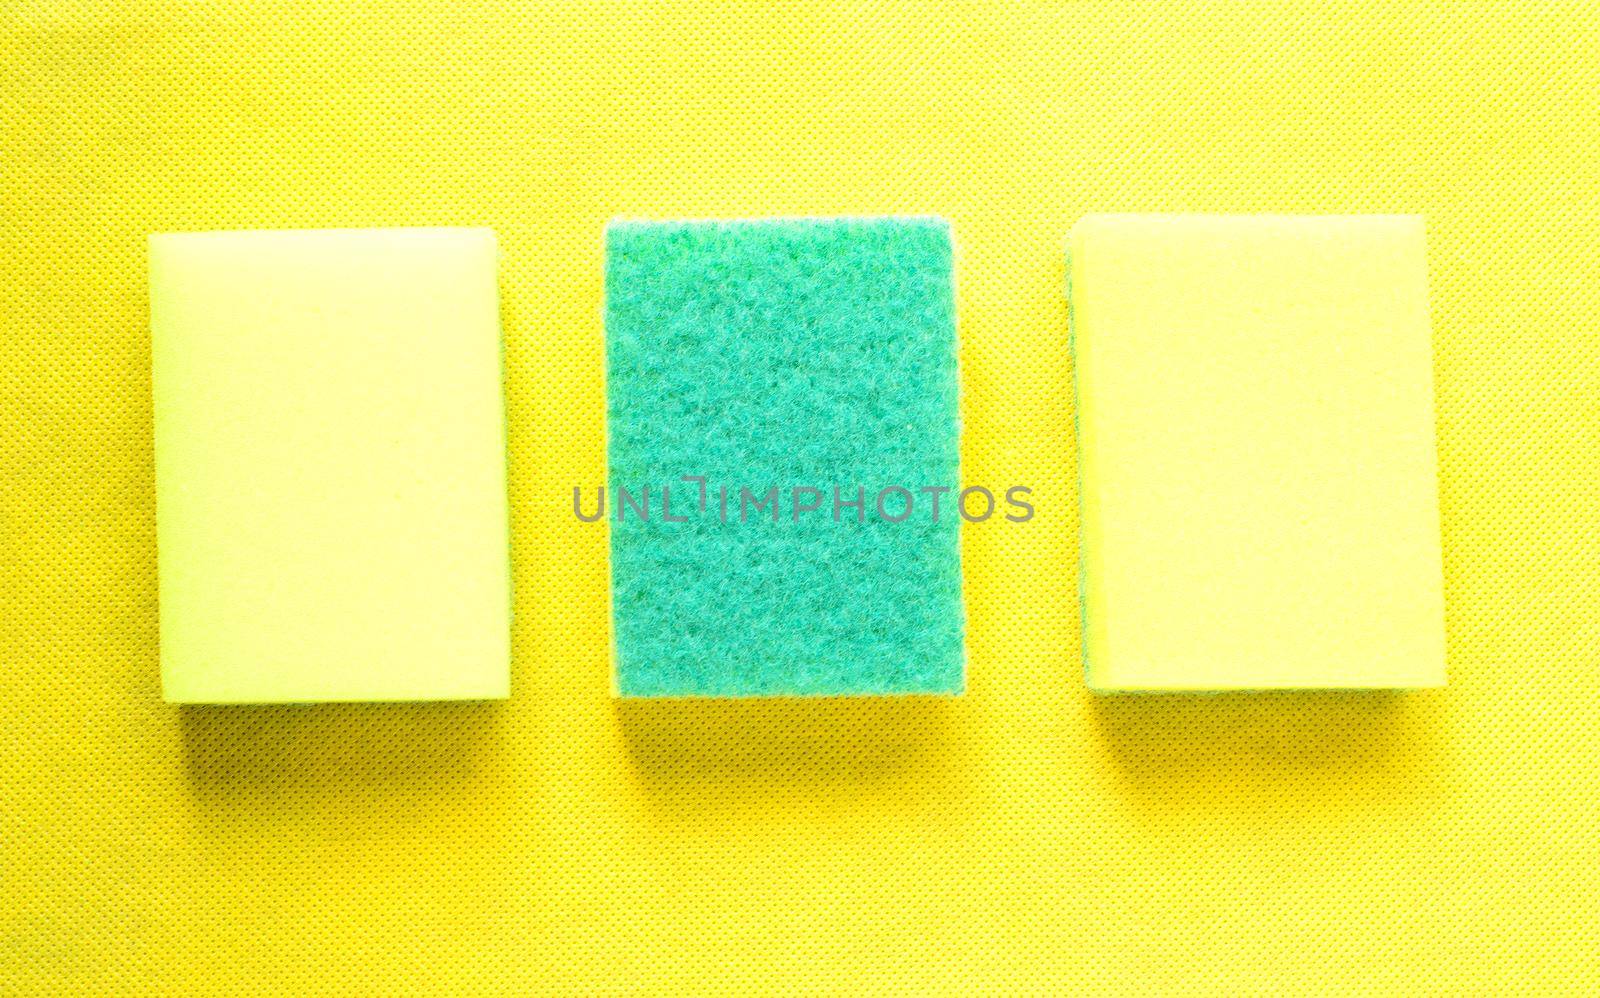 Two bright yellow sponges for cleaning surfaces and one upside-down to remove stubborn dirt on a yellow background.